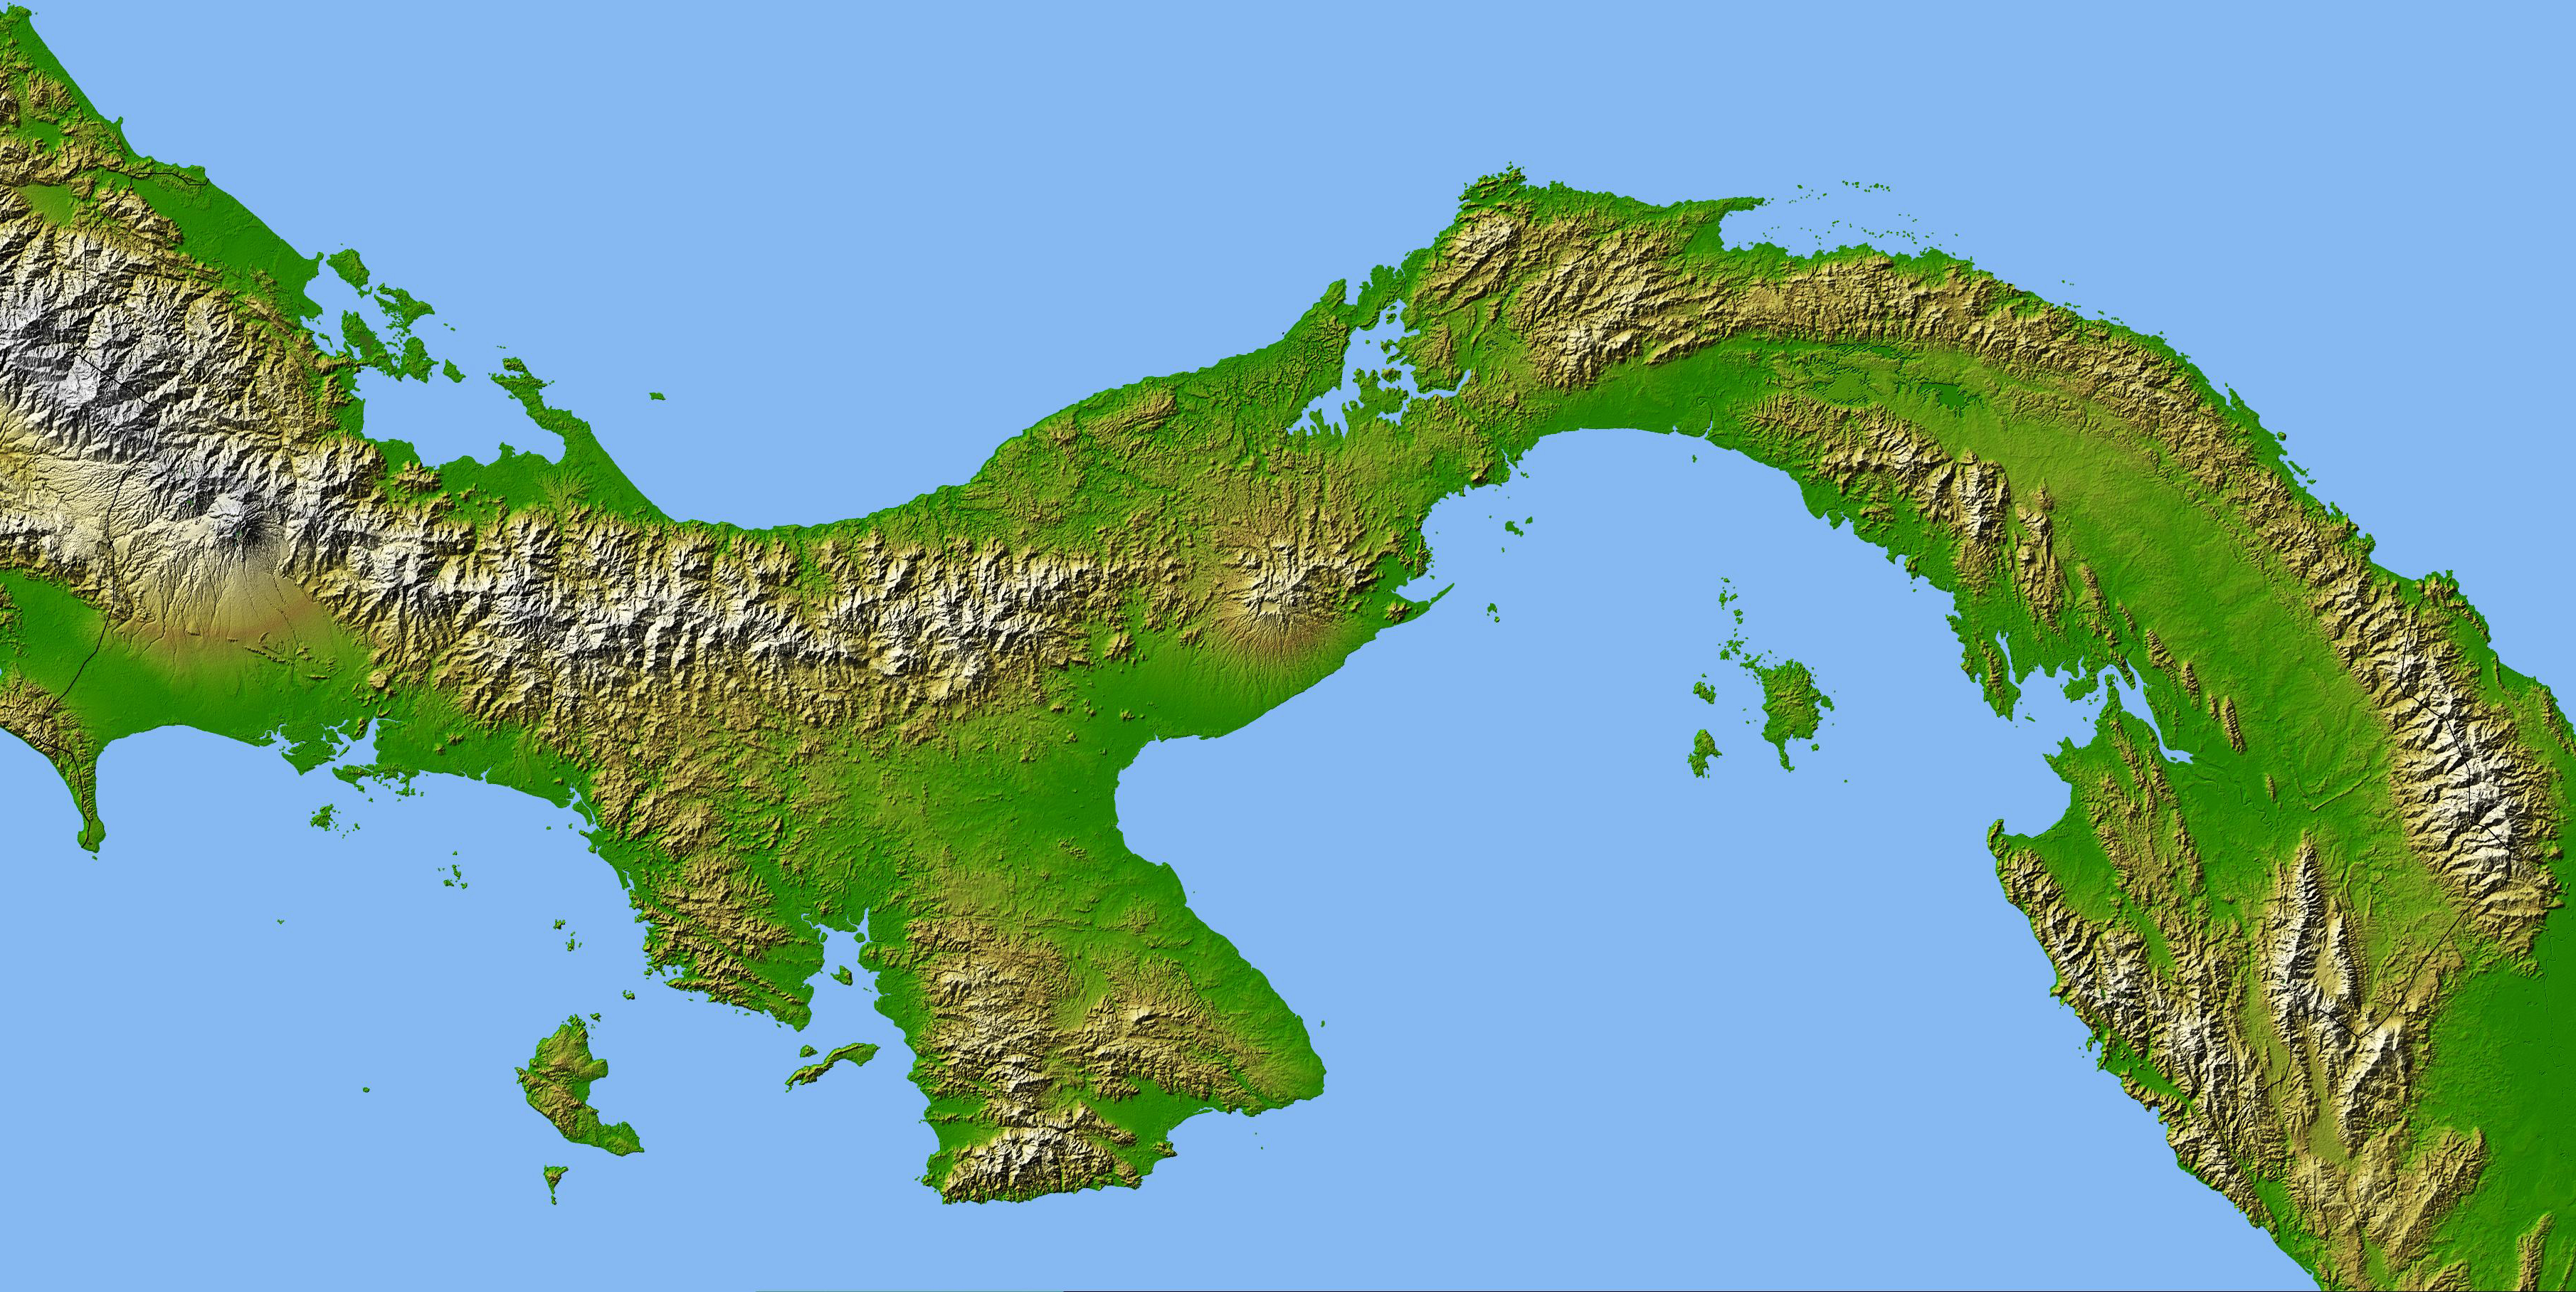 Panama Isthmus That Changed The World